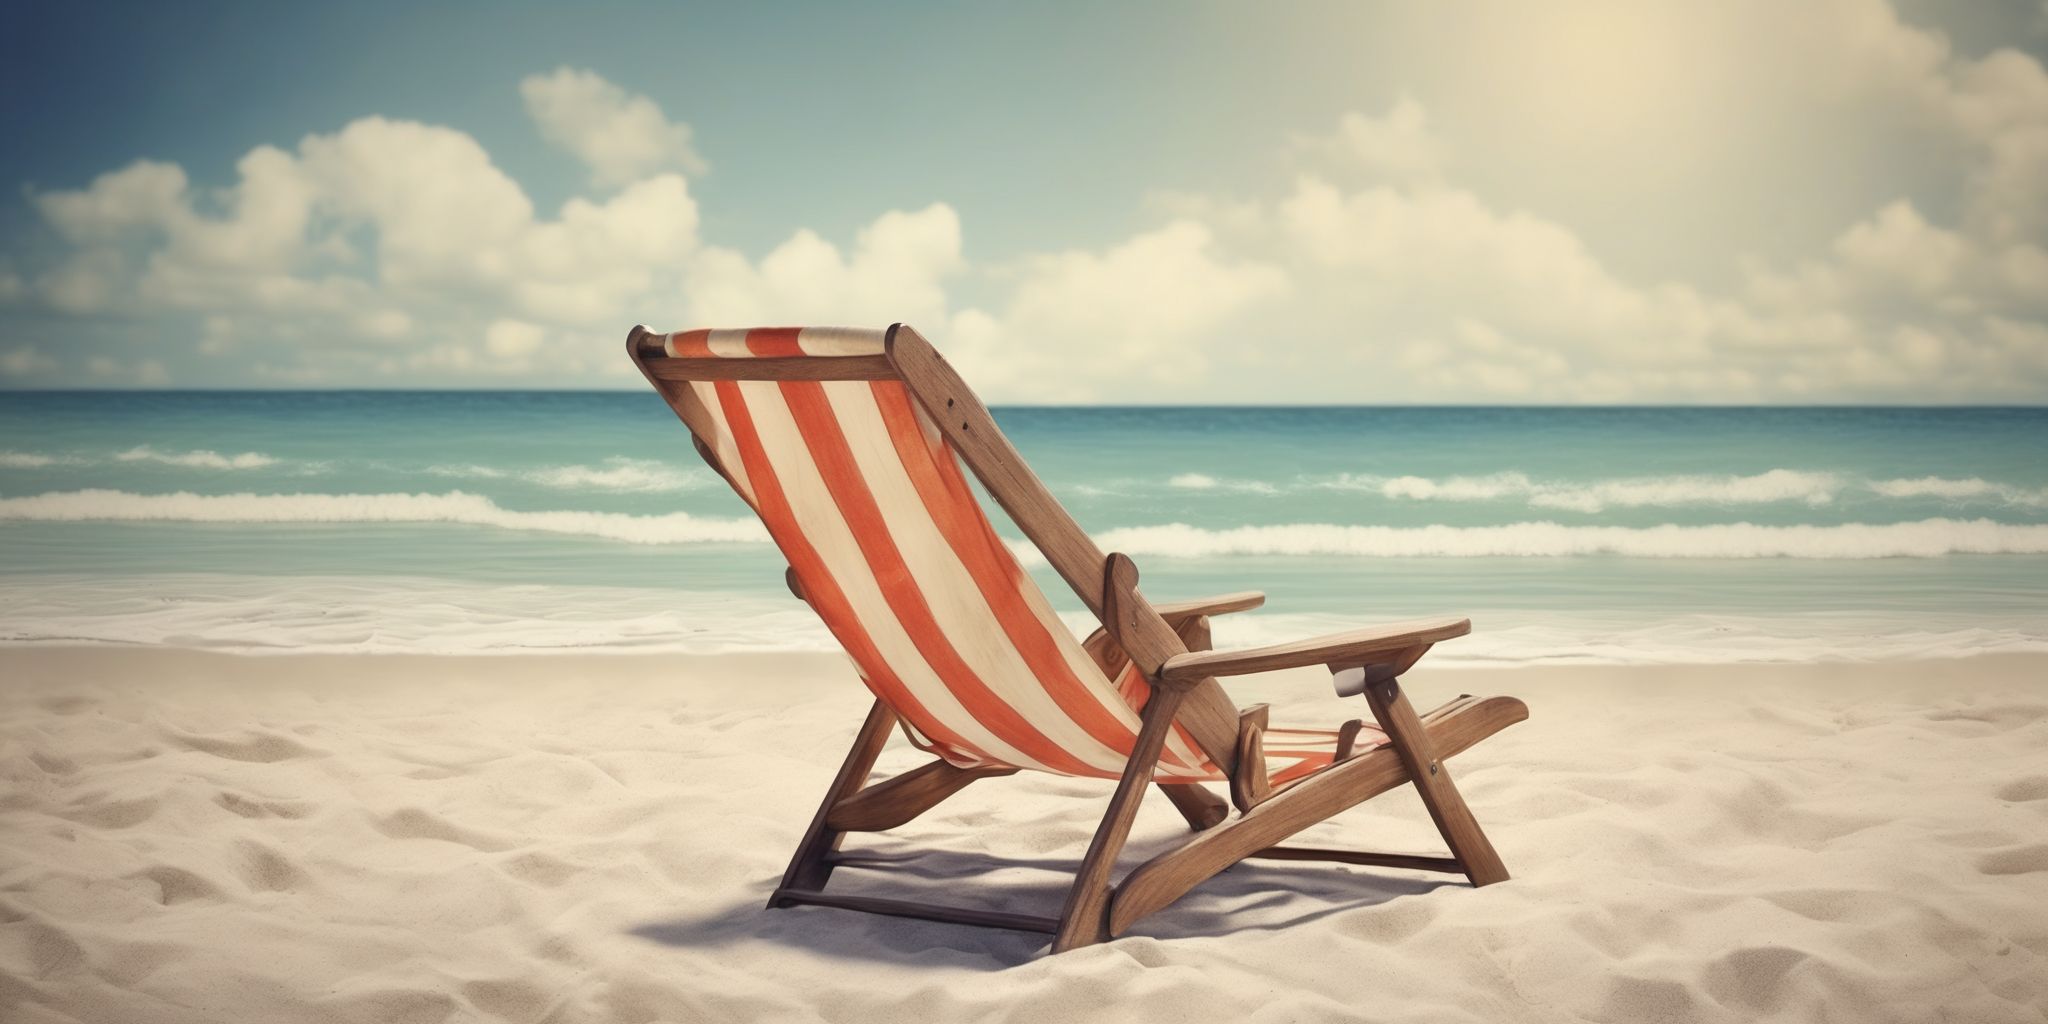 Retirement: Beach chair  in realistic, photographic style